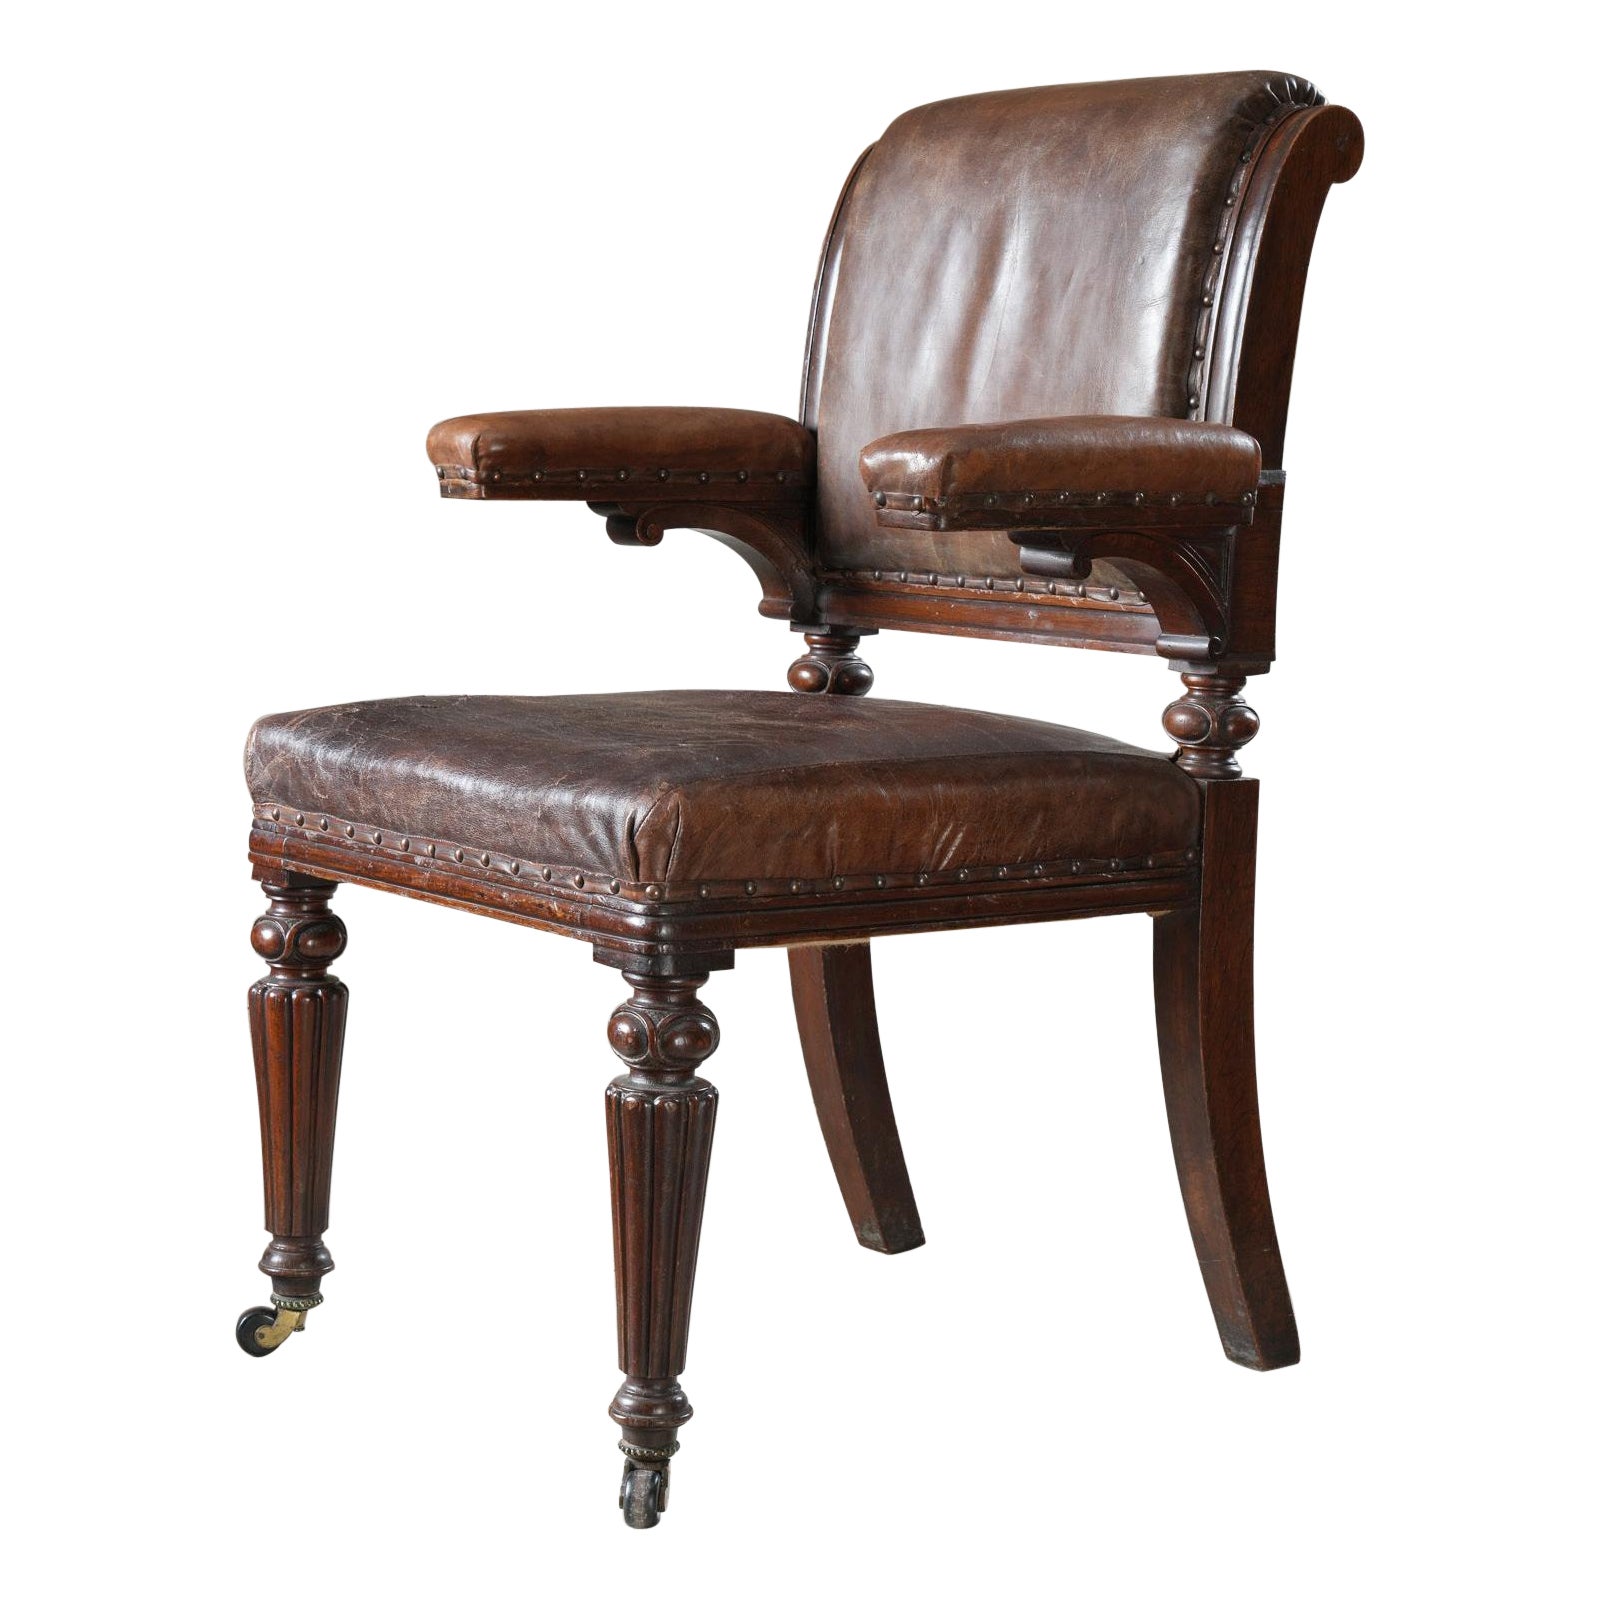 A 19th Century Leather Desk Chair For Sale